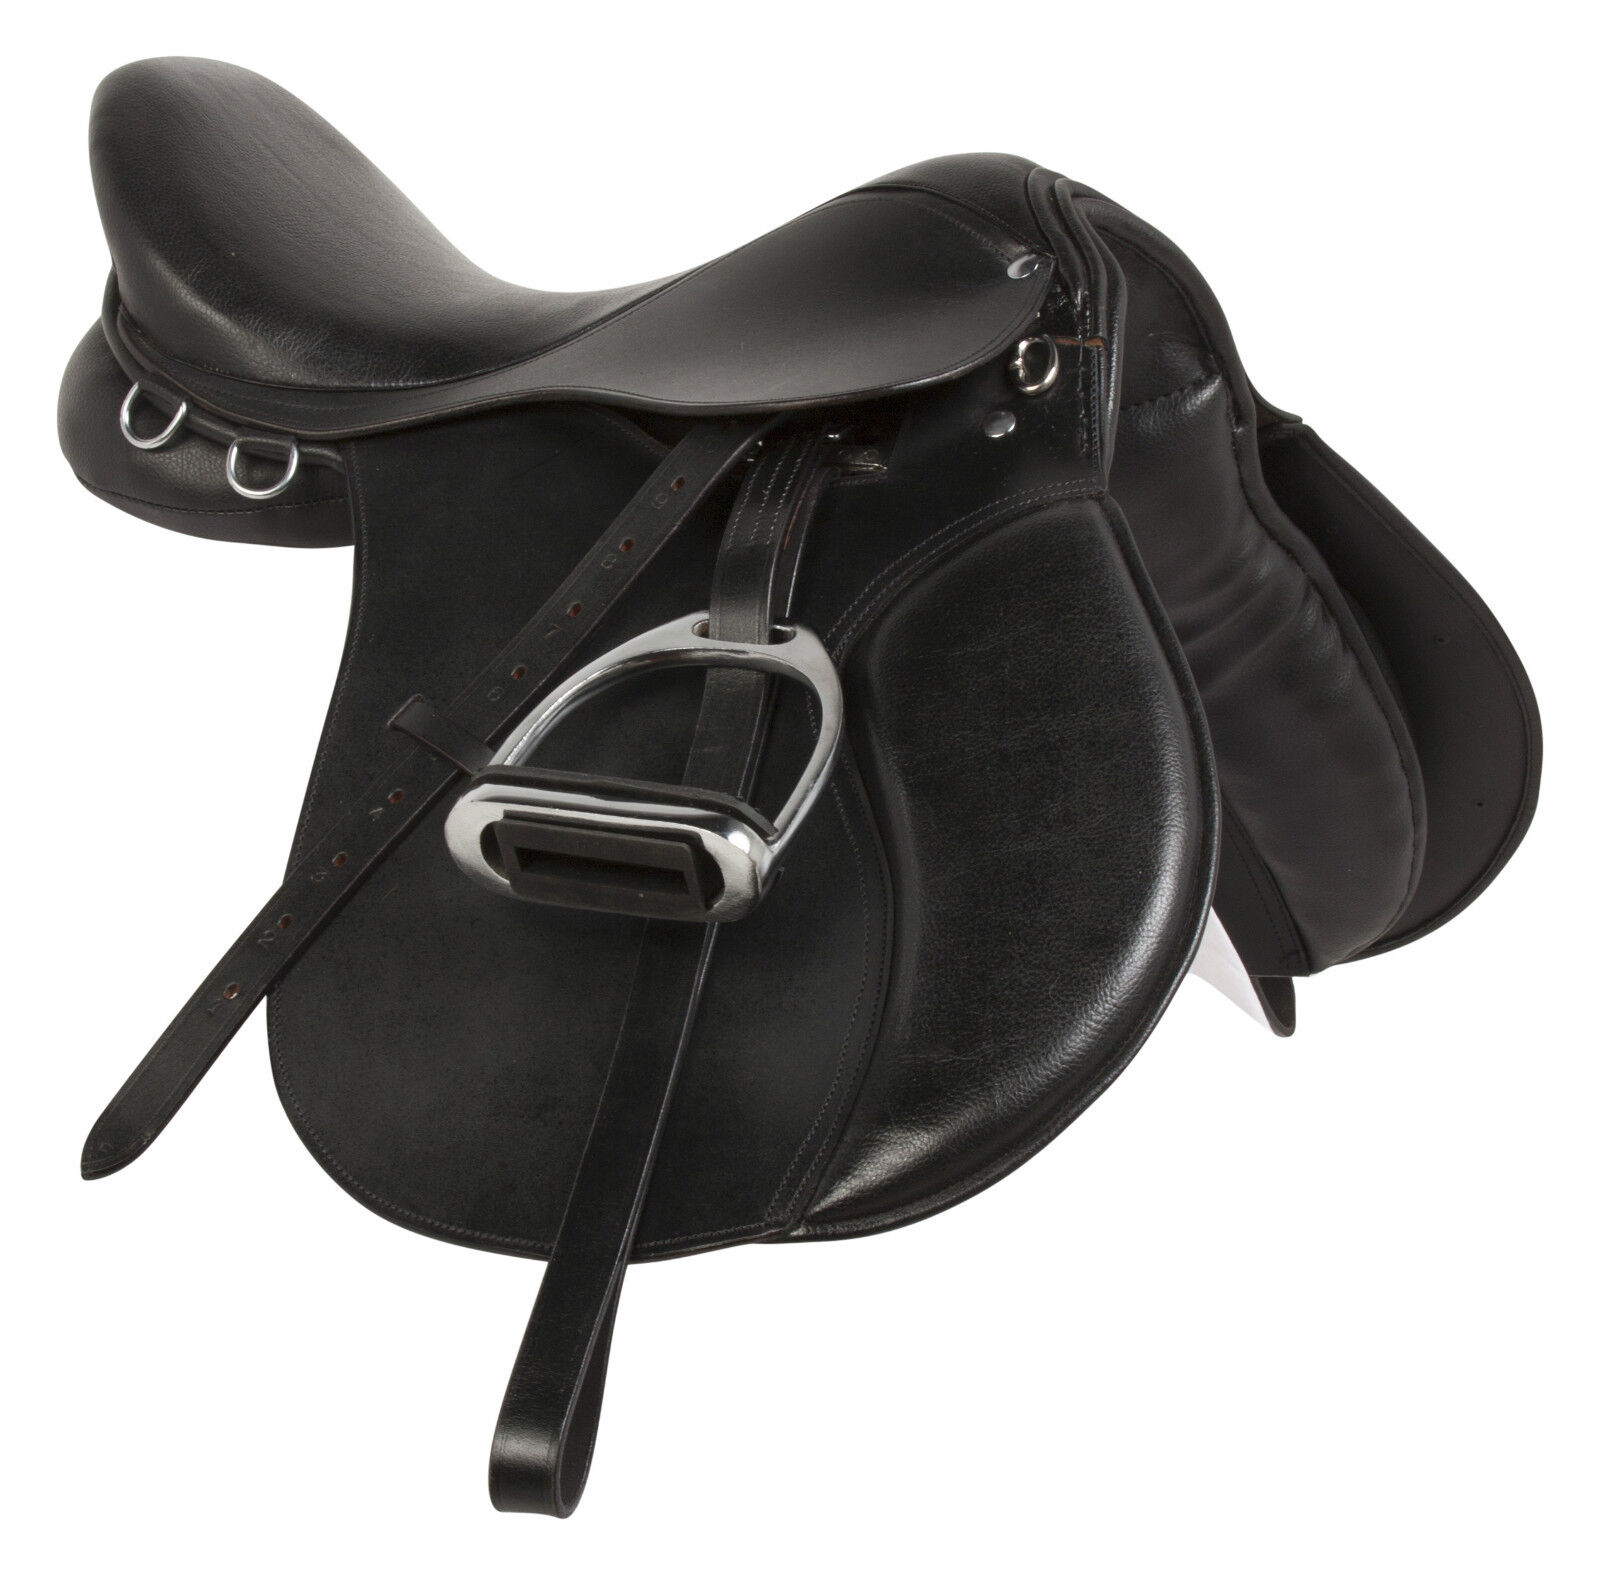 16 17 18 BEGINNER ENGLISH ALL PURPOSE BLACK TRAIL LEATHER HORSE SADDLE TACK NEW